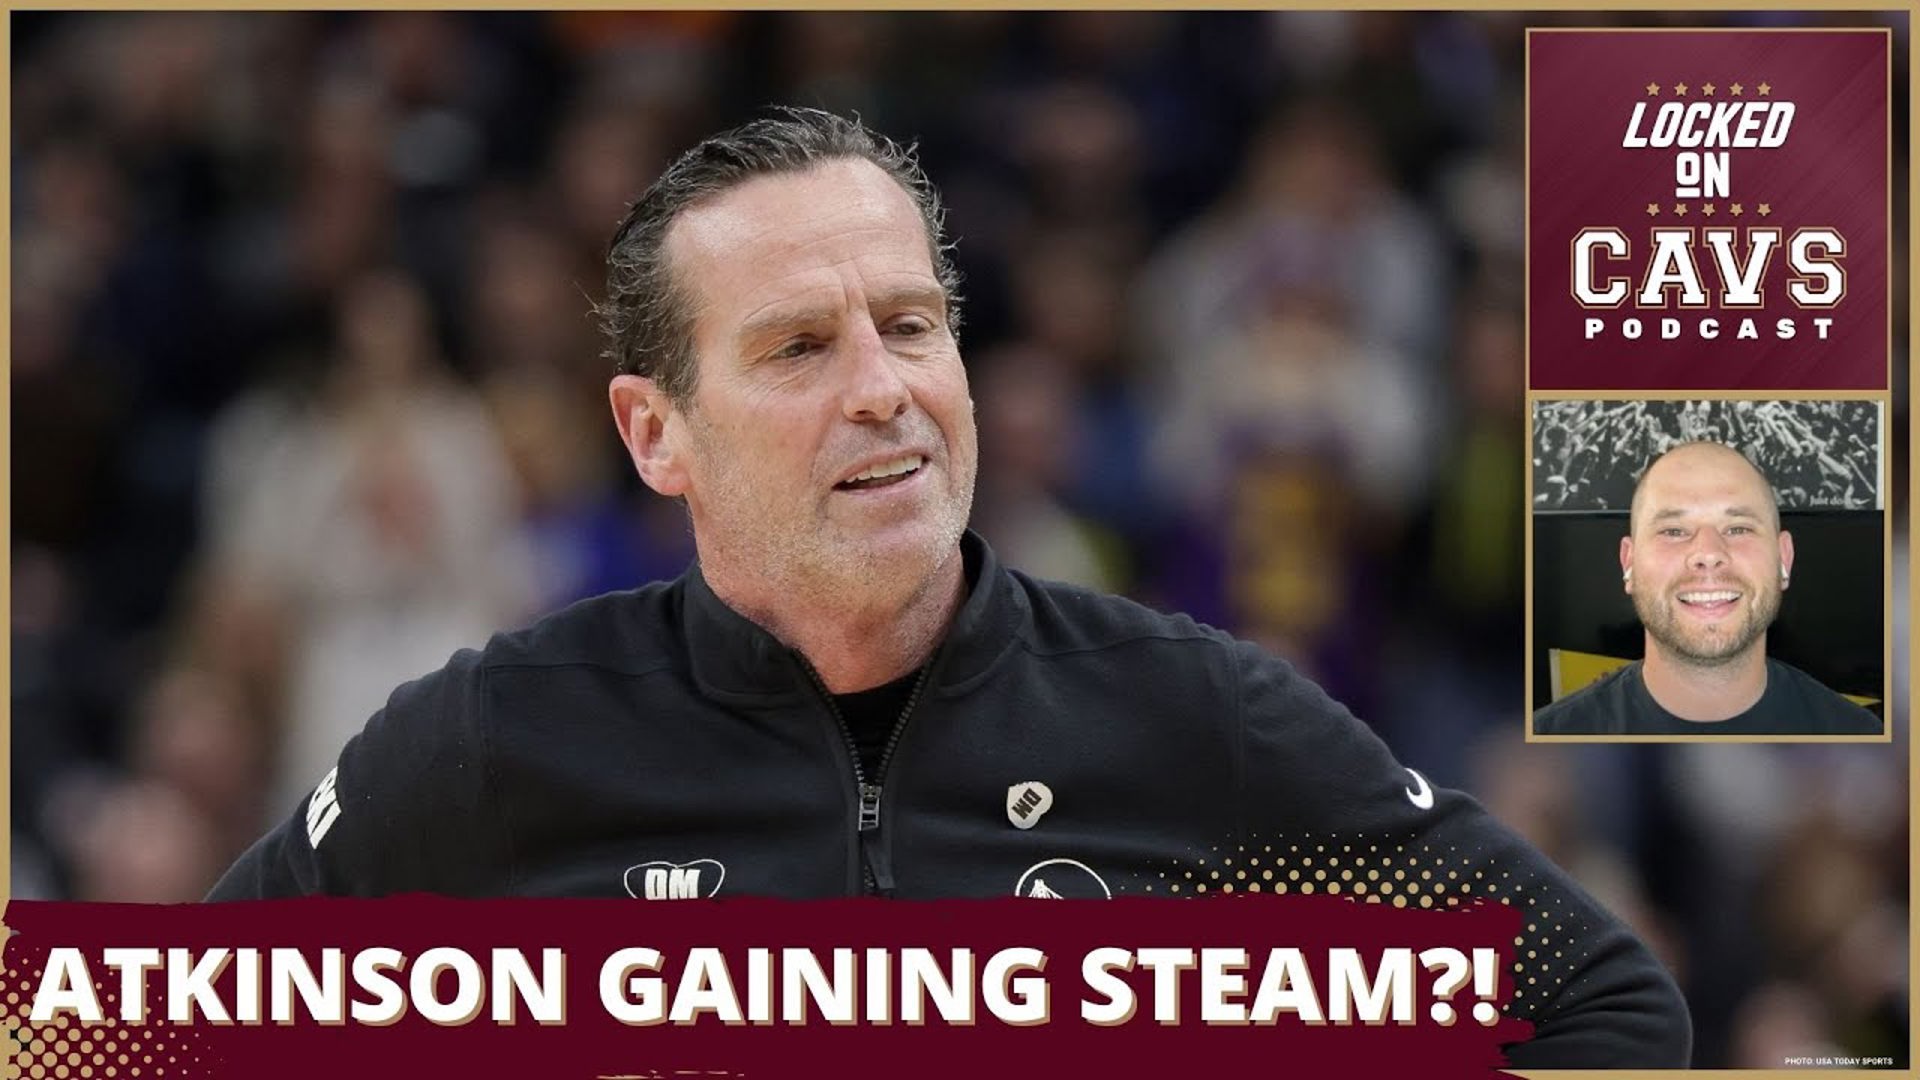 Kenny Atkinson is gaining steam to be the next head coach of the Cavs and could Paul George end up in Cleveland?